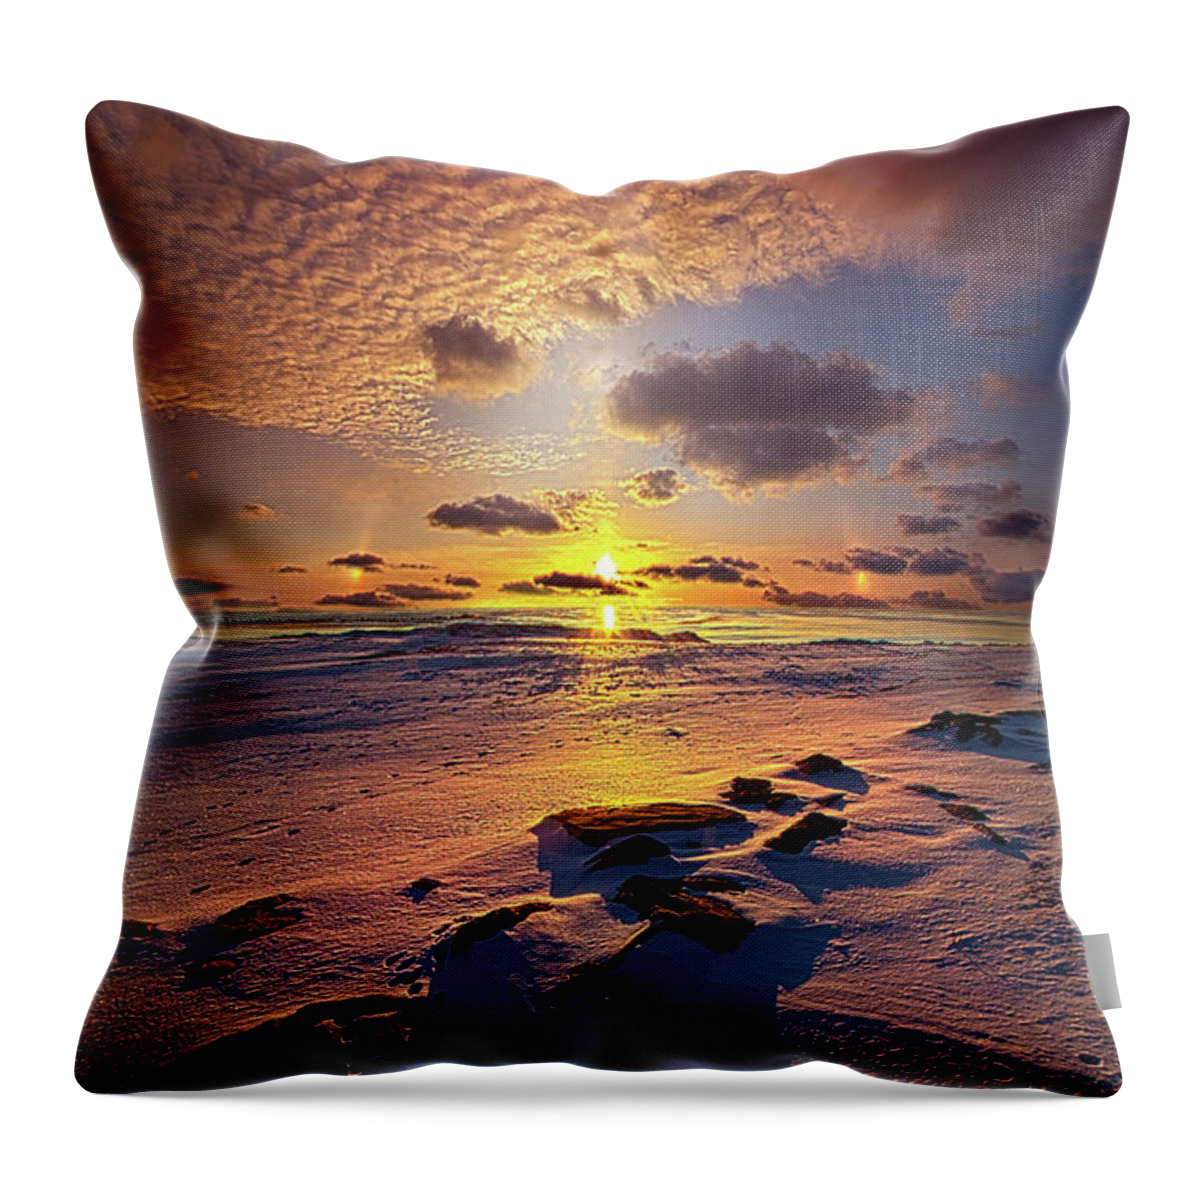 Nopeople Throw Pillow featuring the photograph Long Before by Phil Koch